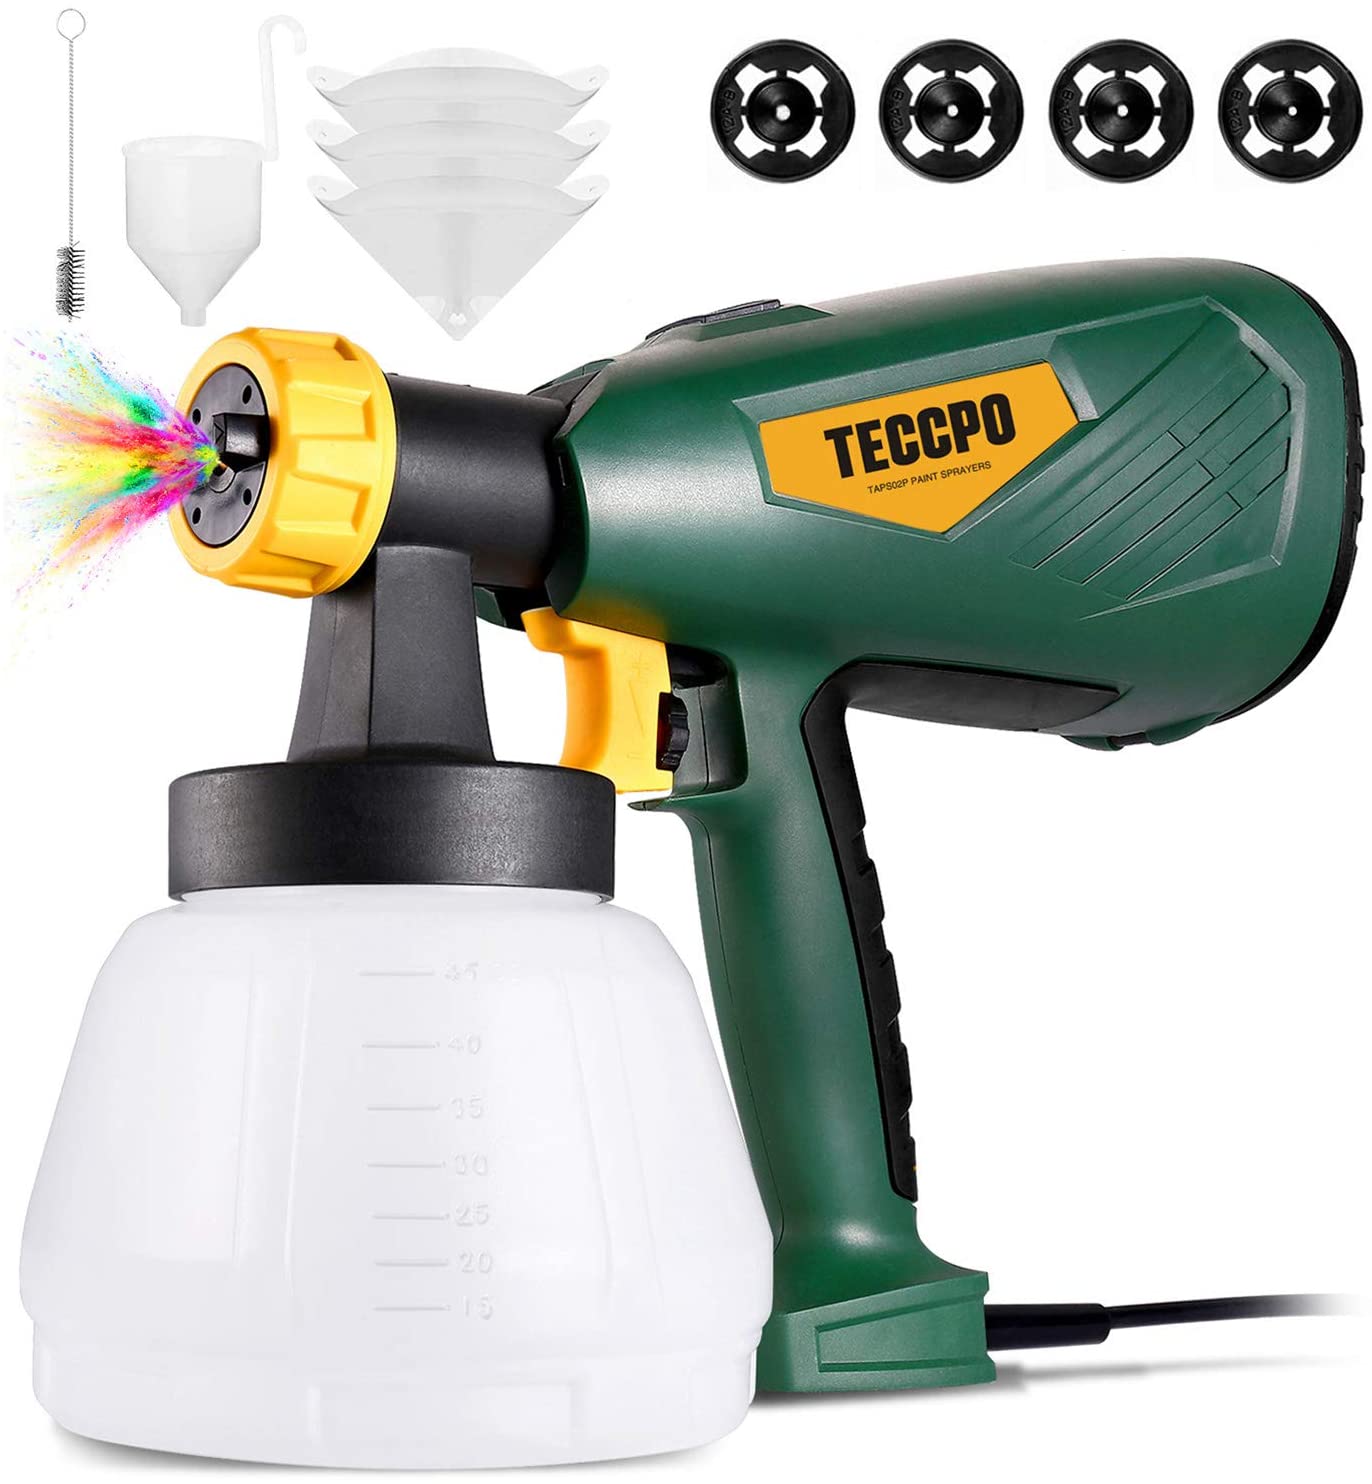 TECCPO Paint Sprayer, 4 Nozzles Sizes, 3 Spray Patterns, 1300ml Detachable Container, Great Finish - image 1 of 6